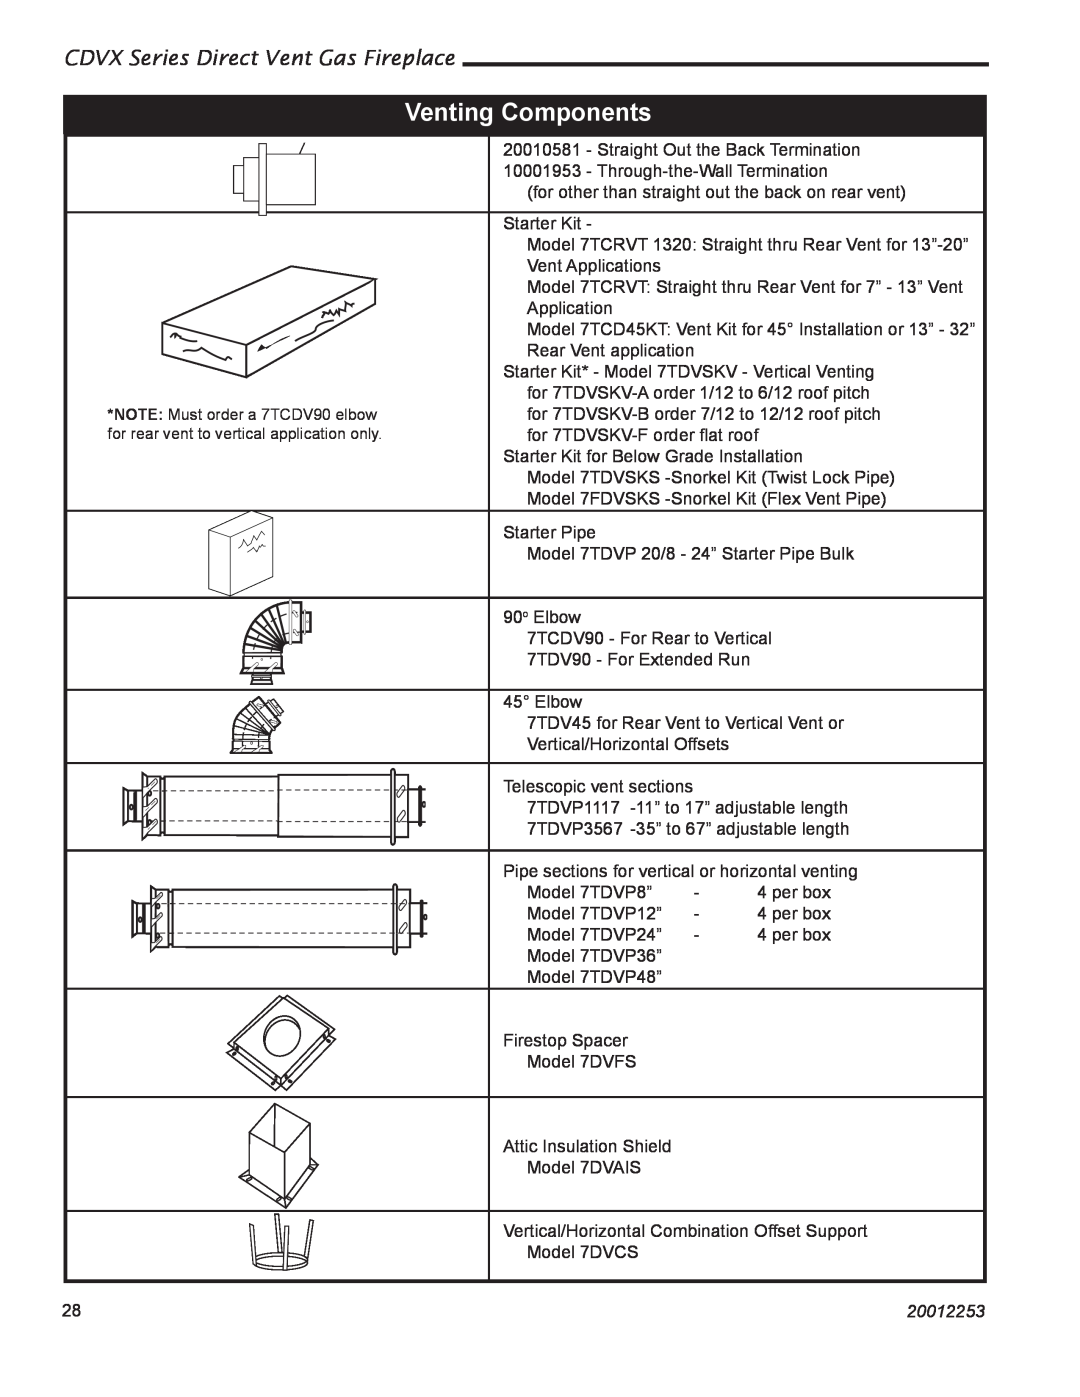 Monessen Hearth 36CDVXTRN installation instructions Venting Components, CDVX Series Direct Vent Gas Fireplace, 20012253 